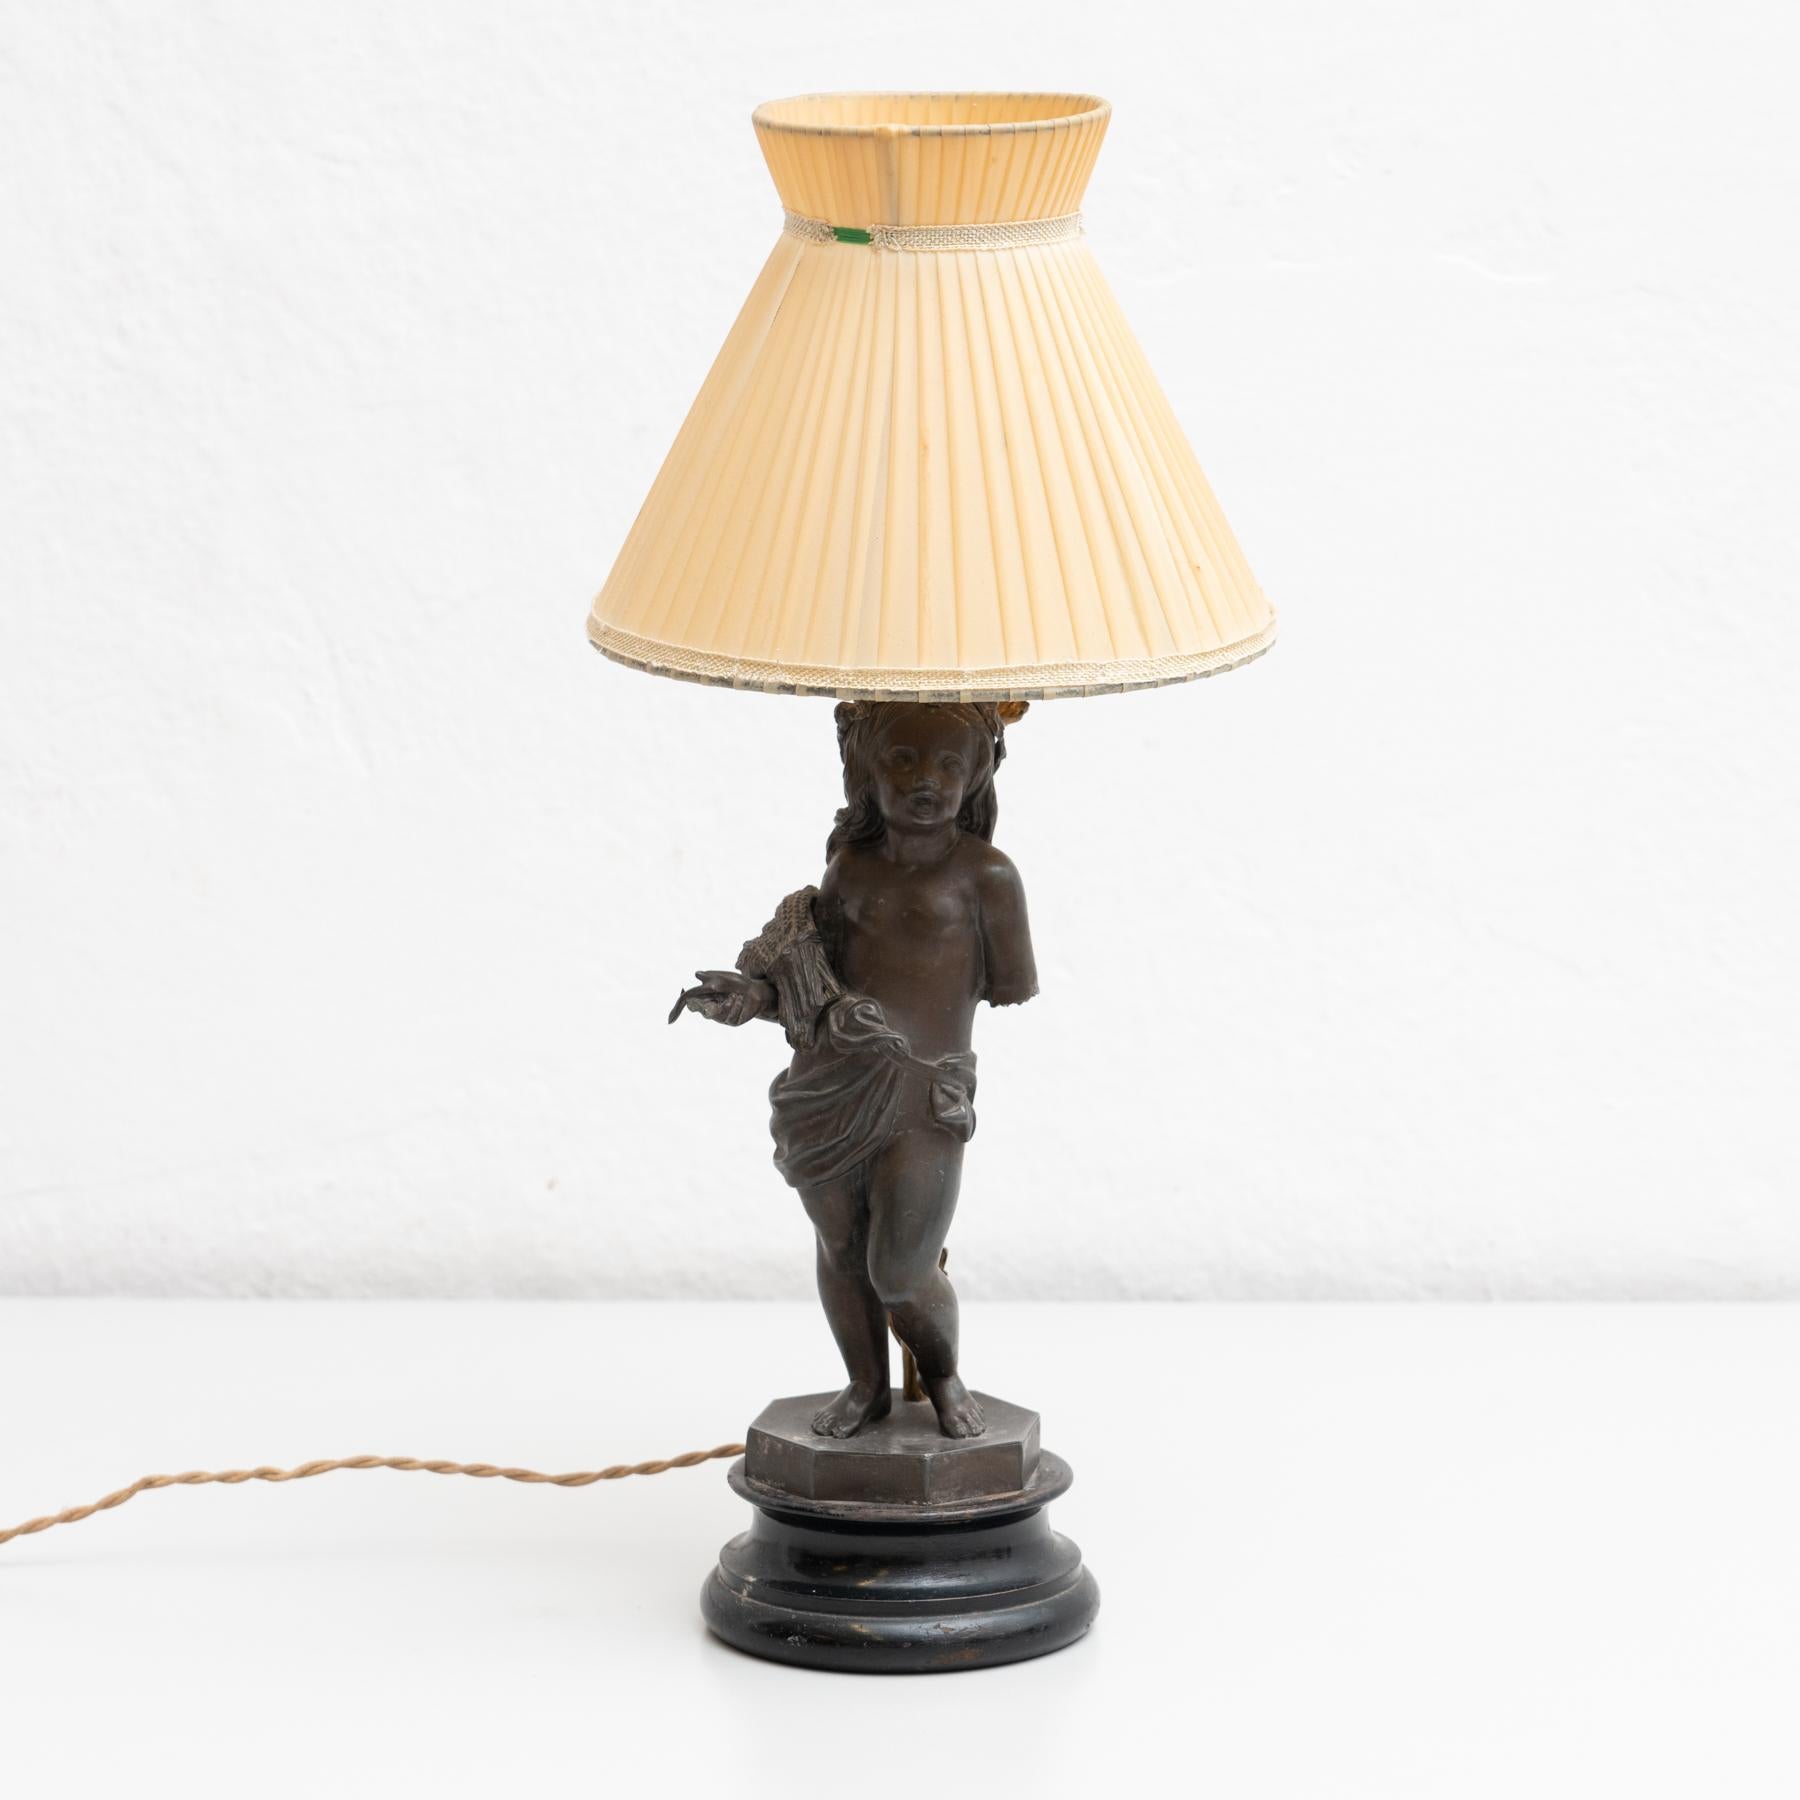 Early 20th century table lamp, with a beautiful decoration of a boy and a paper screen.

Manufactured by unknown designer in Spain.

In original condition, with minor wear consistent with age and use, preserving a beautiful